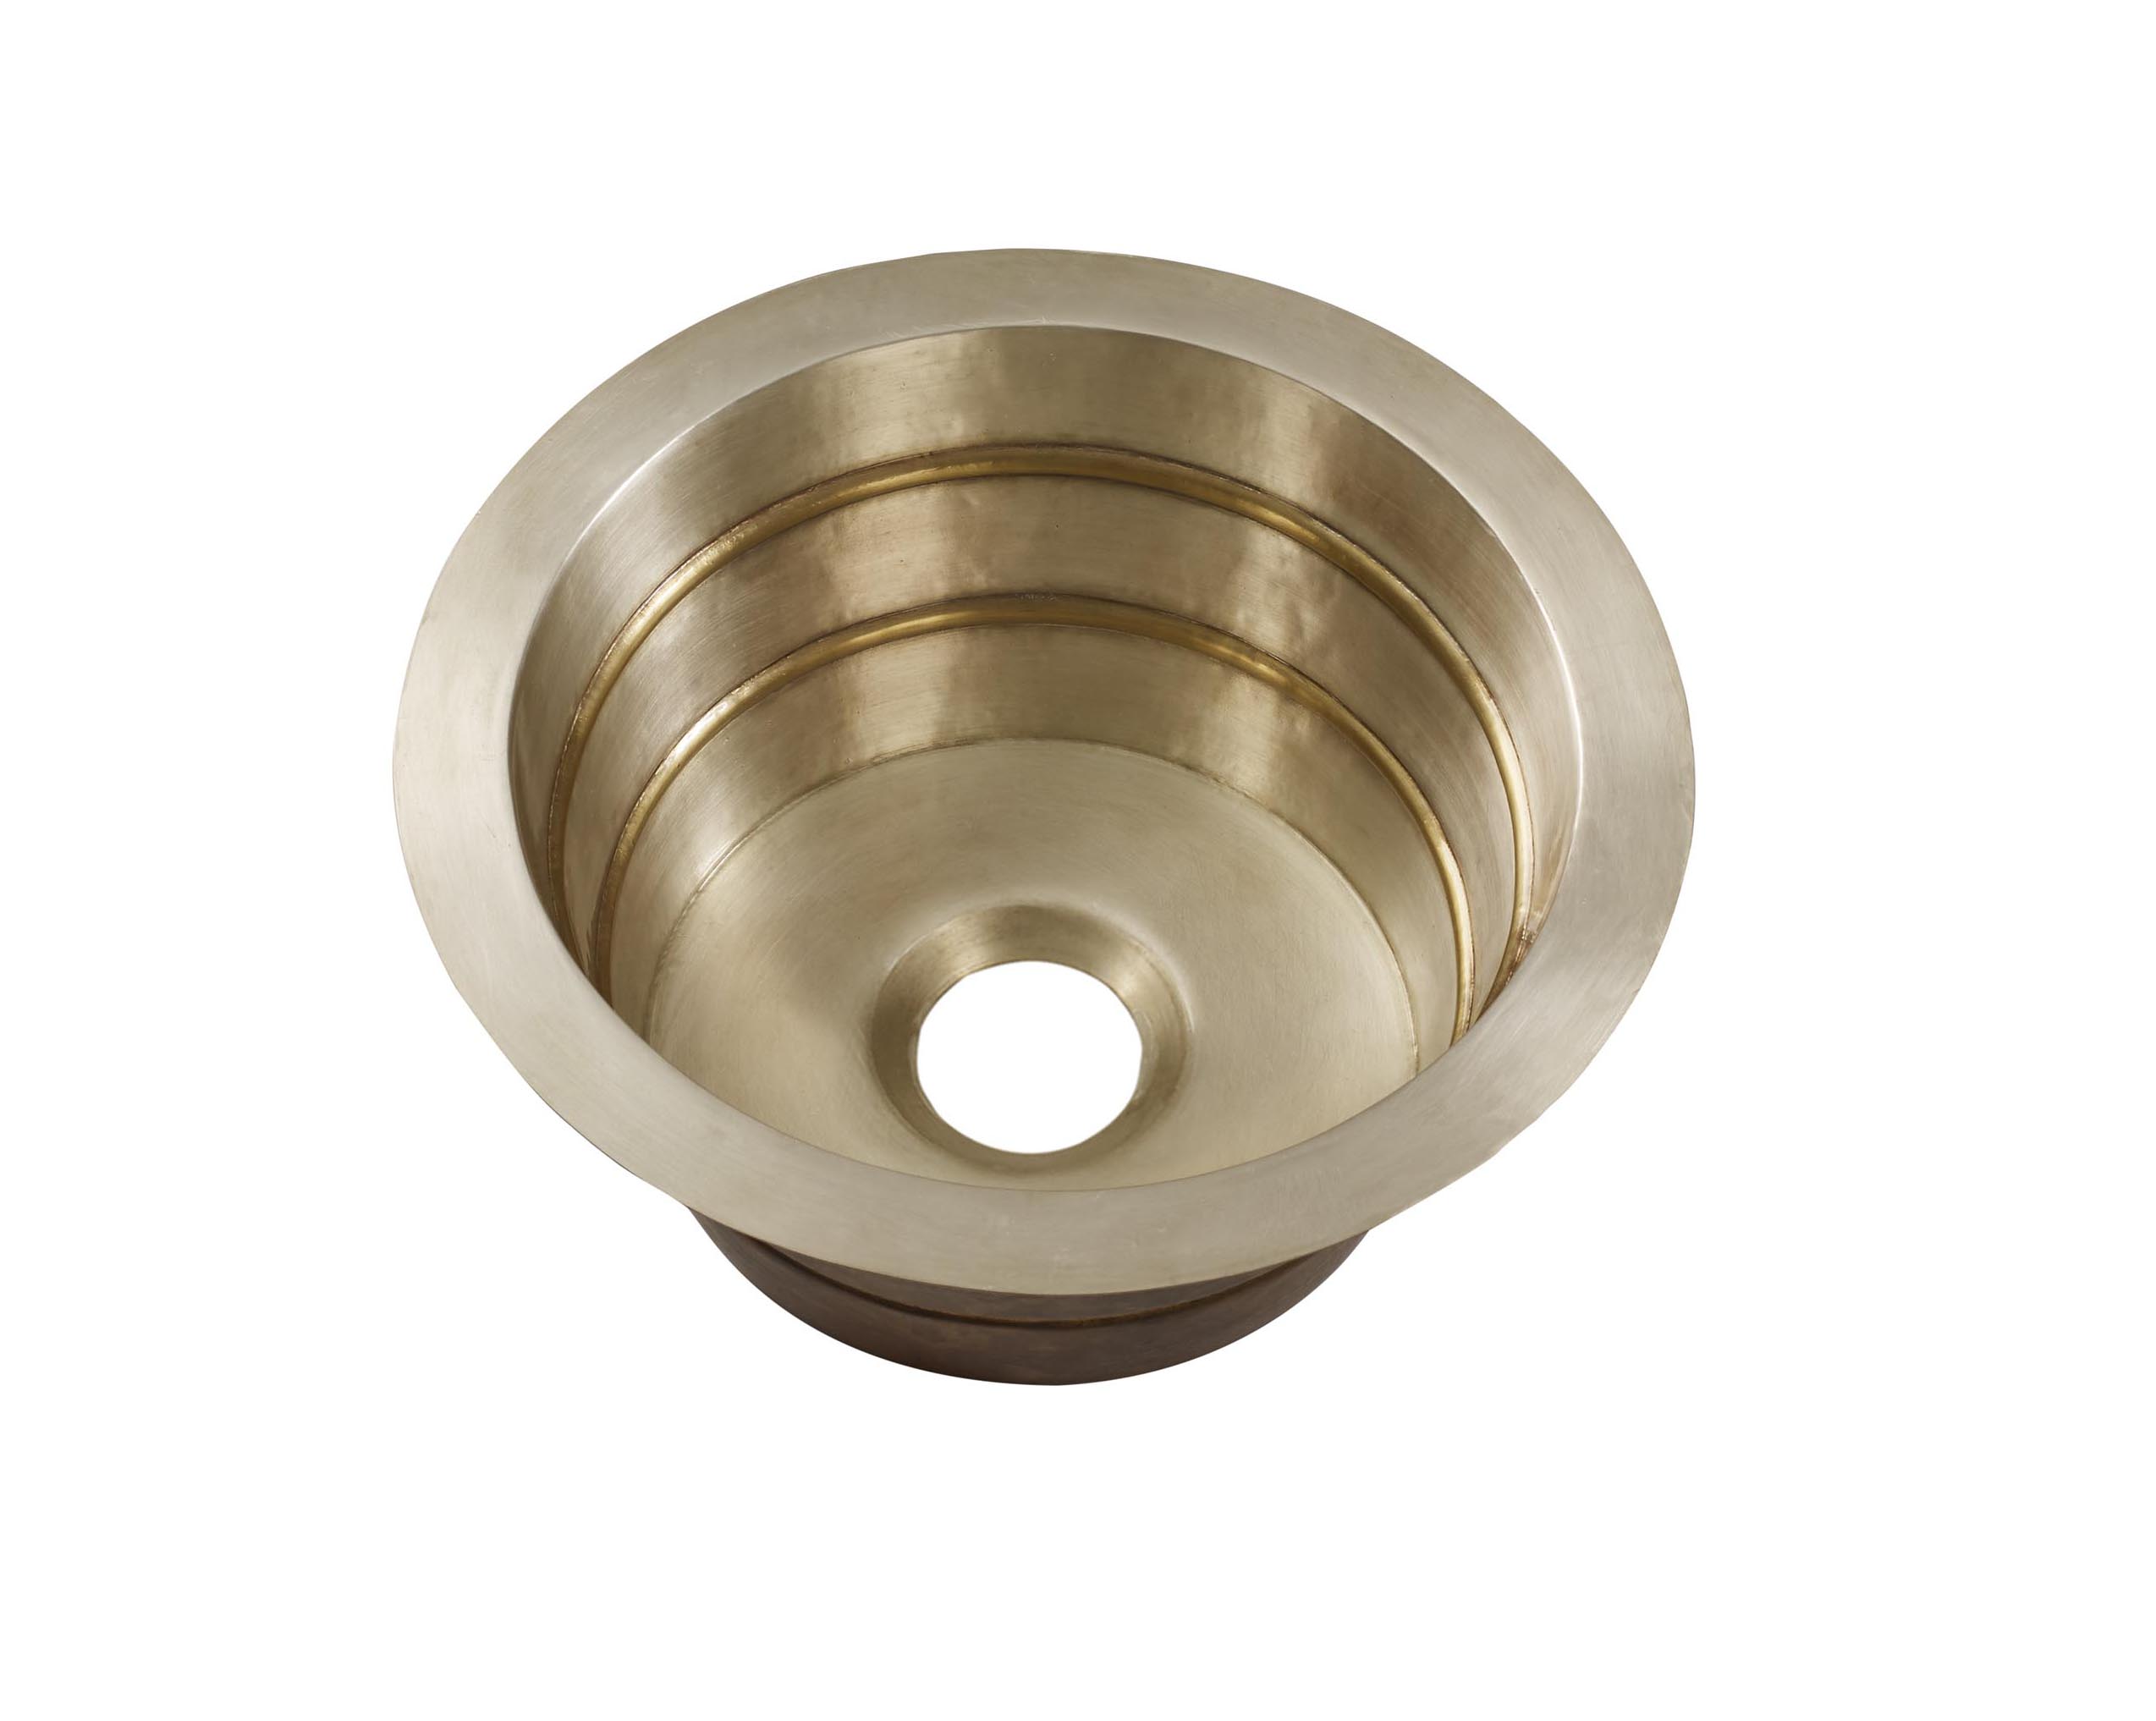 Thompson Traders Sinks - Bar & Prep - Copper - Quintana KCBS17 - Satin Brass and Burnished Nickel (Smooth)